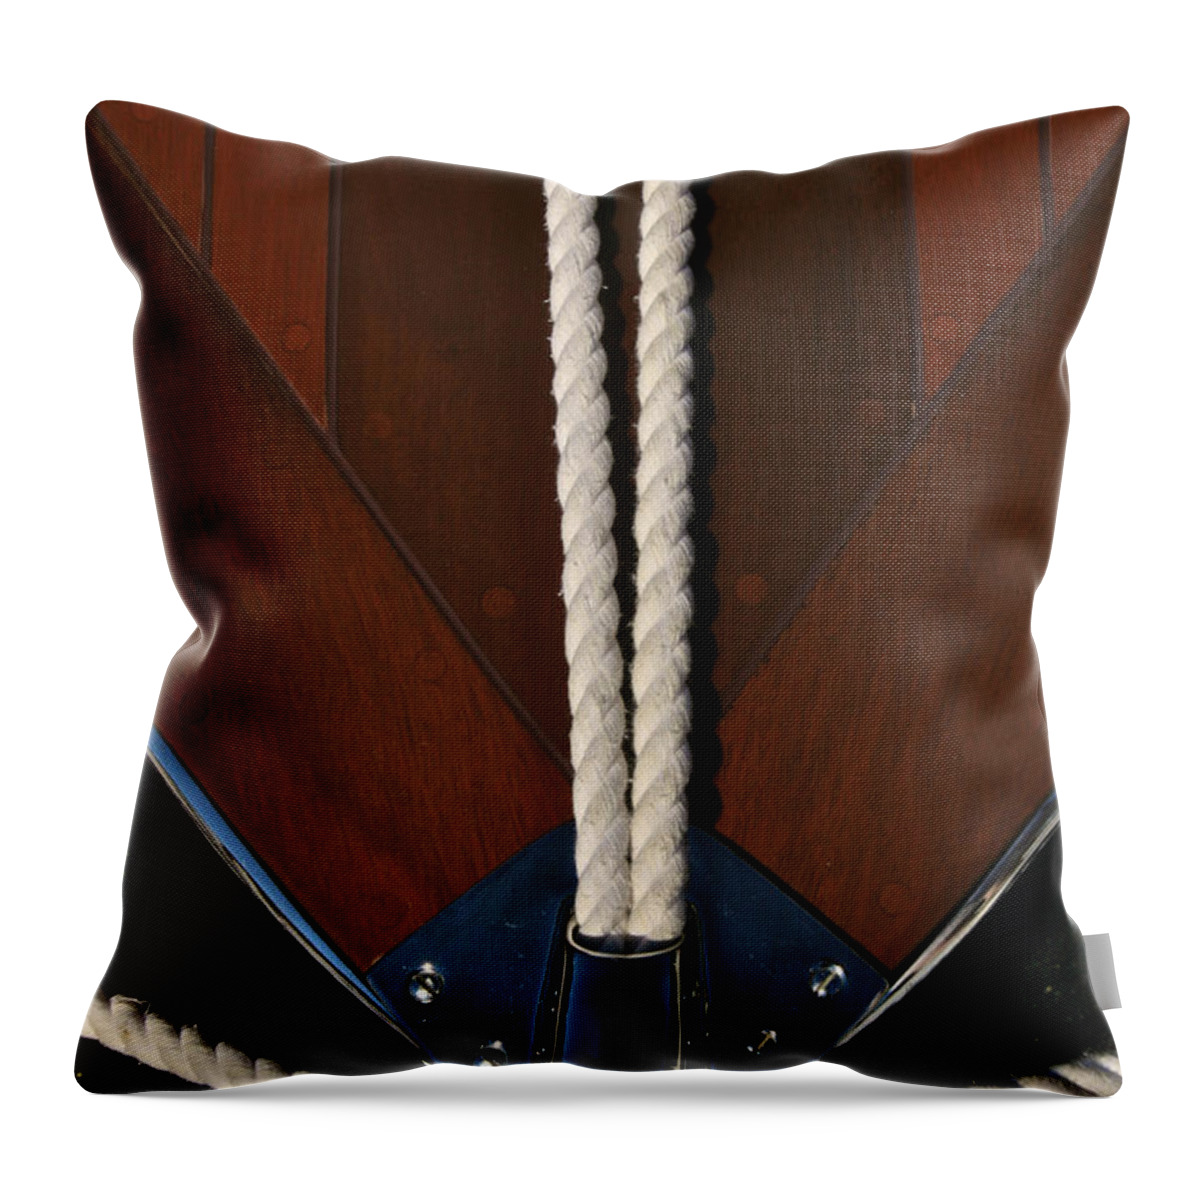 Tahoe Throw Pillow featuring the photograph Wooden Boat Detail by Steven Lapkin